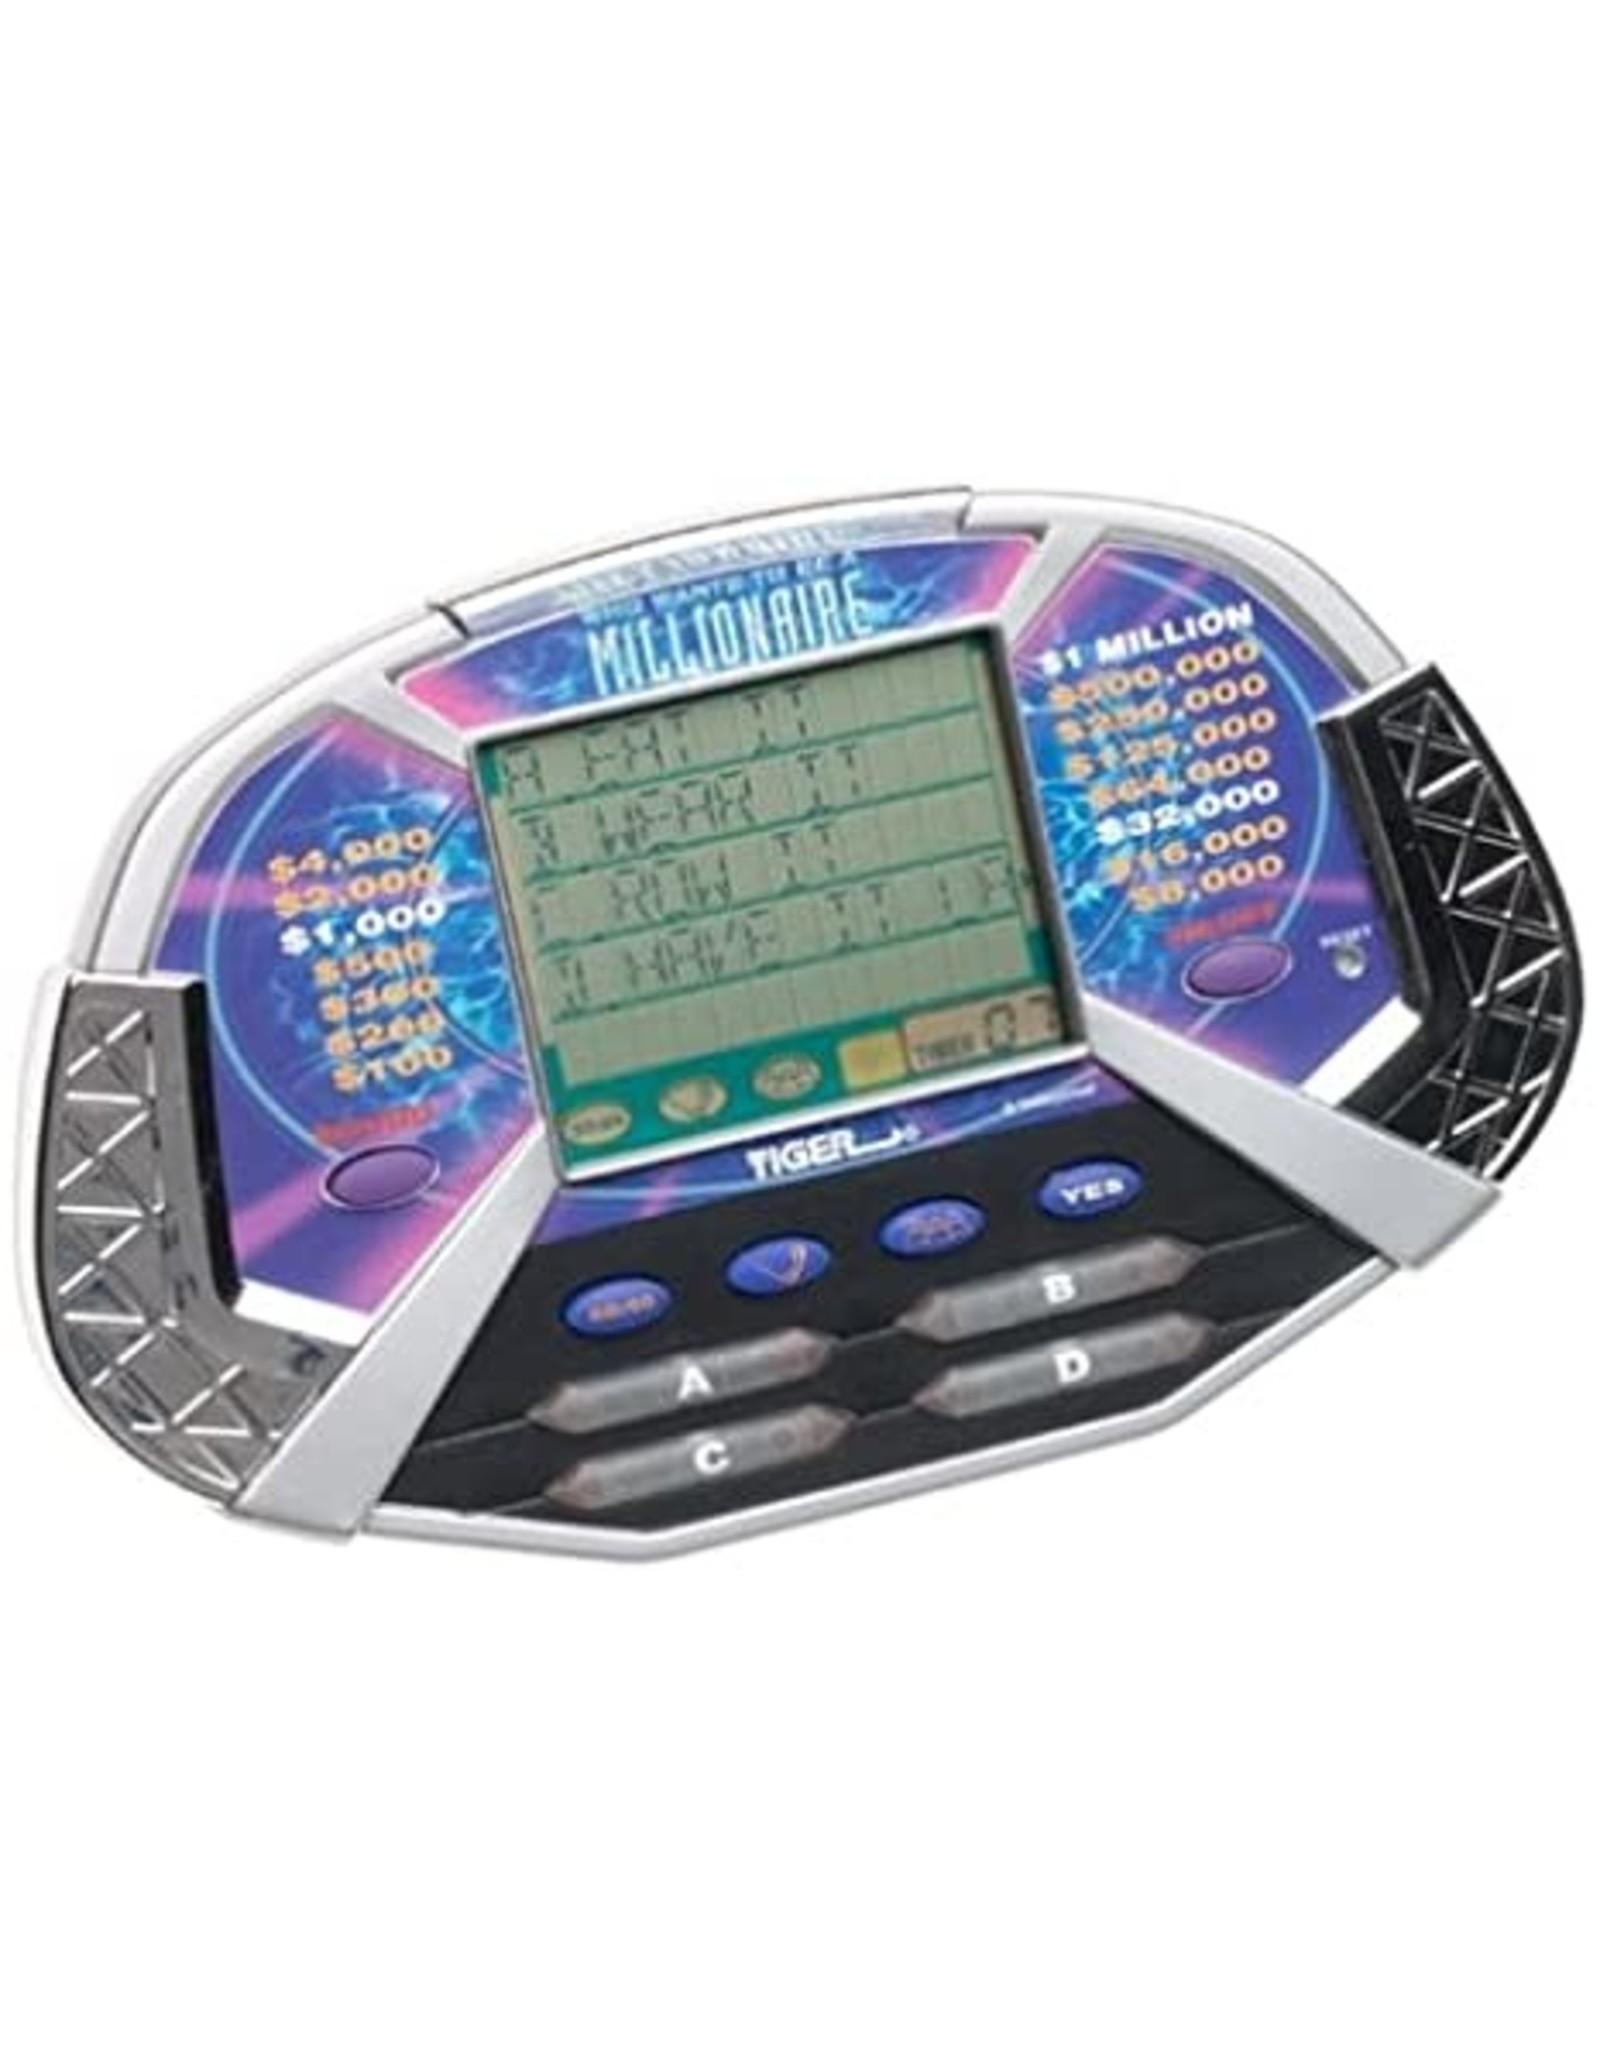 tiger Electronics Tiger Electronics Who Wants To Be A Millionaire (Used, Inlcudes Manual)